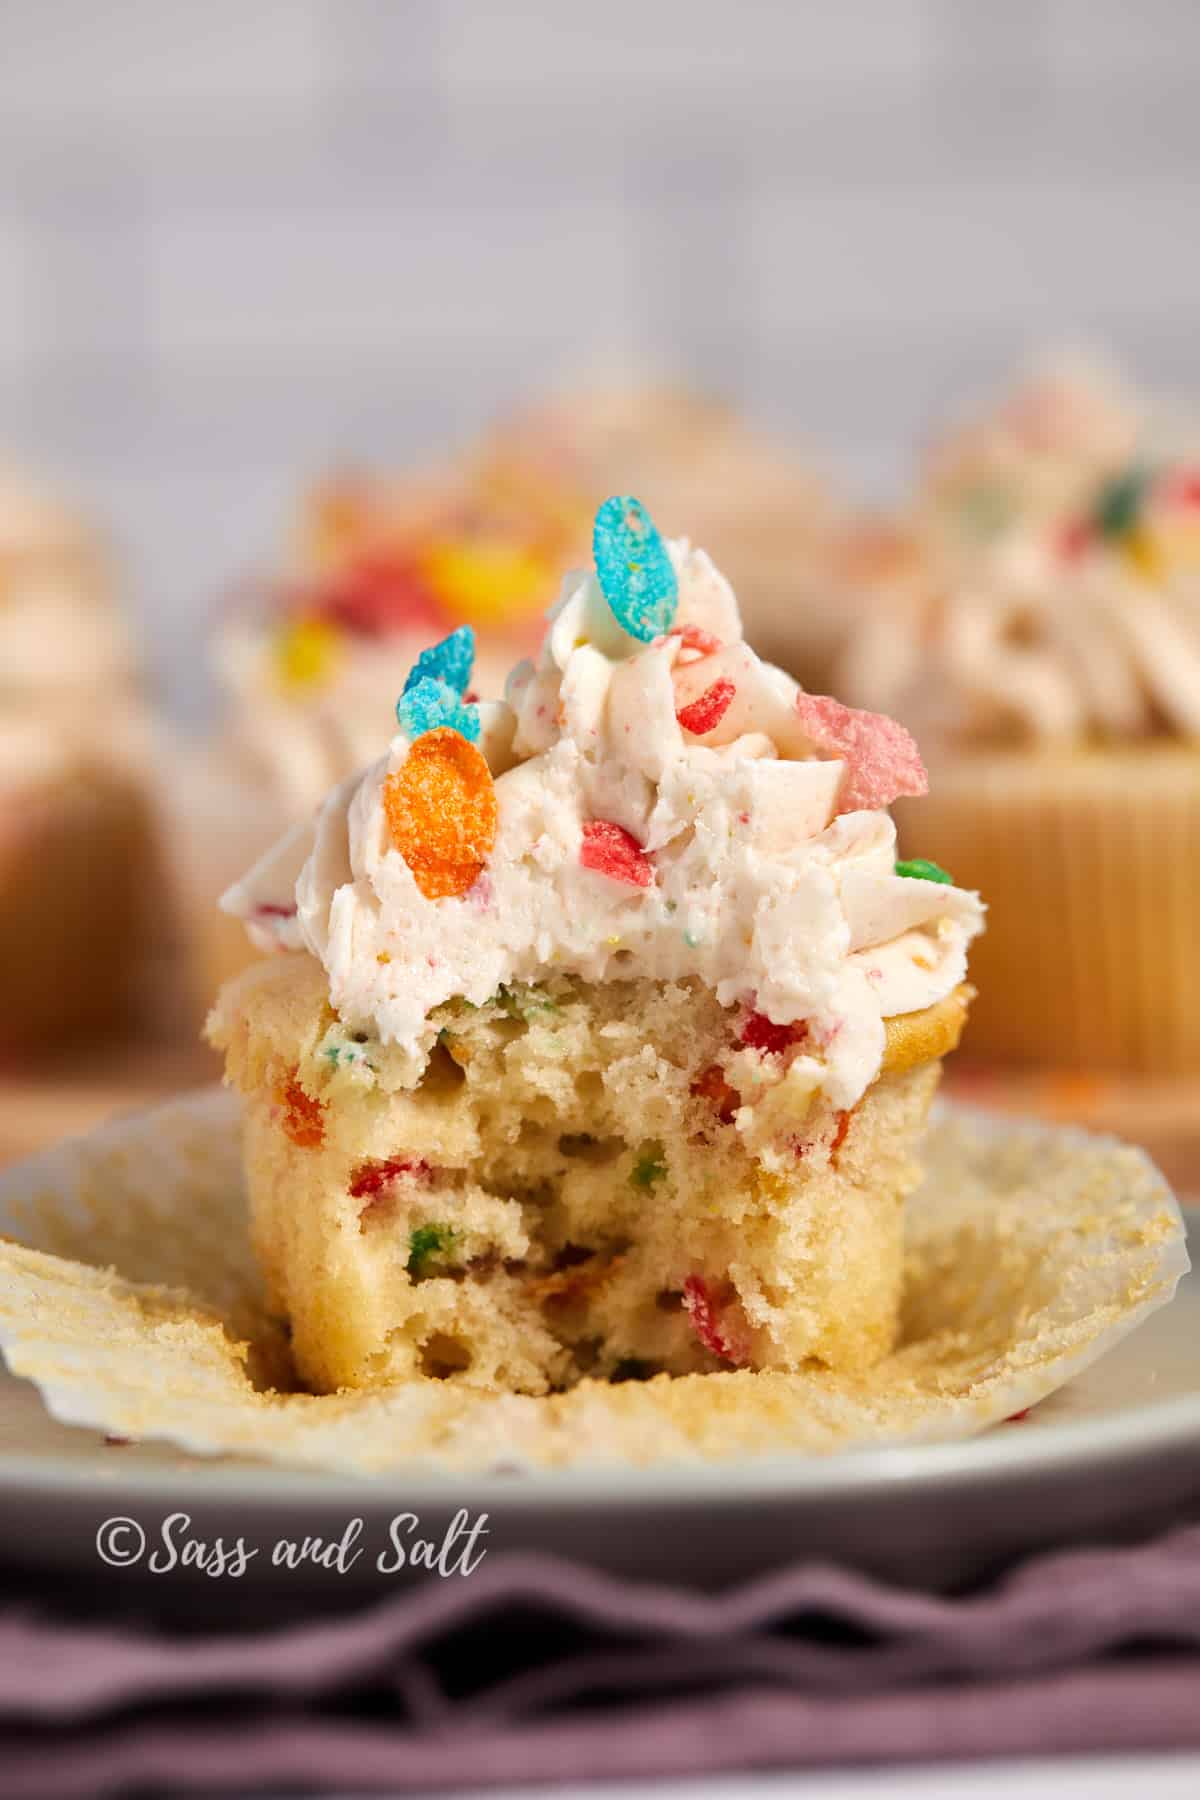 A delicious Fruity Pebbles cupcake with a bite taken out of it, revealing the colorful cereal pieces mixed into the batter. The cupcake is topped with creamy frosting sprinkled with more Fruity Pebbles, creating a playful and tempting dessert. The cupcake sits on a plate with a crumpled wrapper, and the background features more cupcakes and a soft, textured purple cloth.